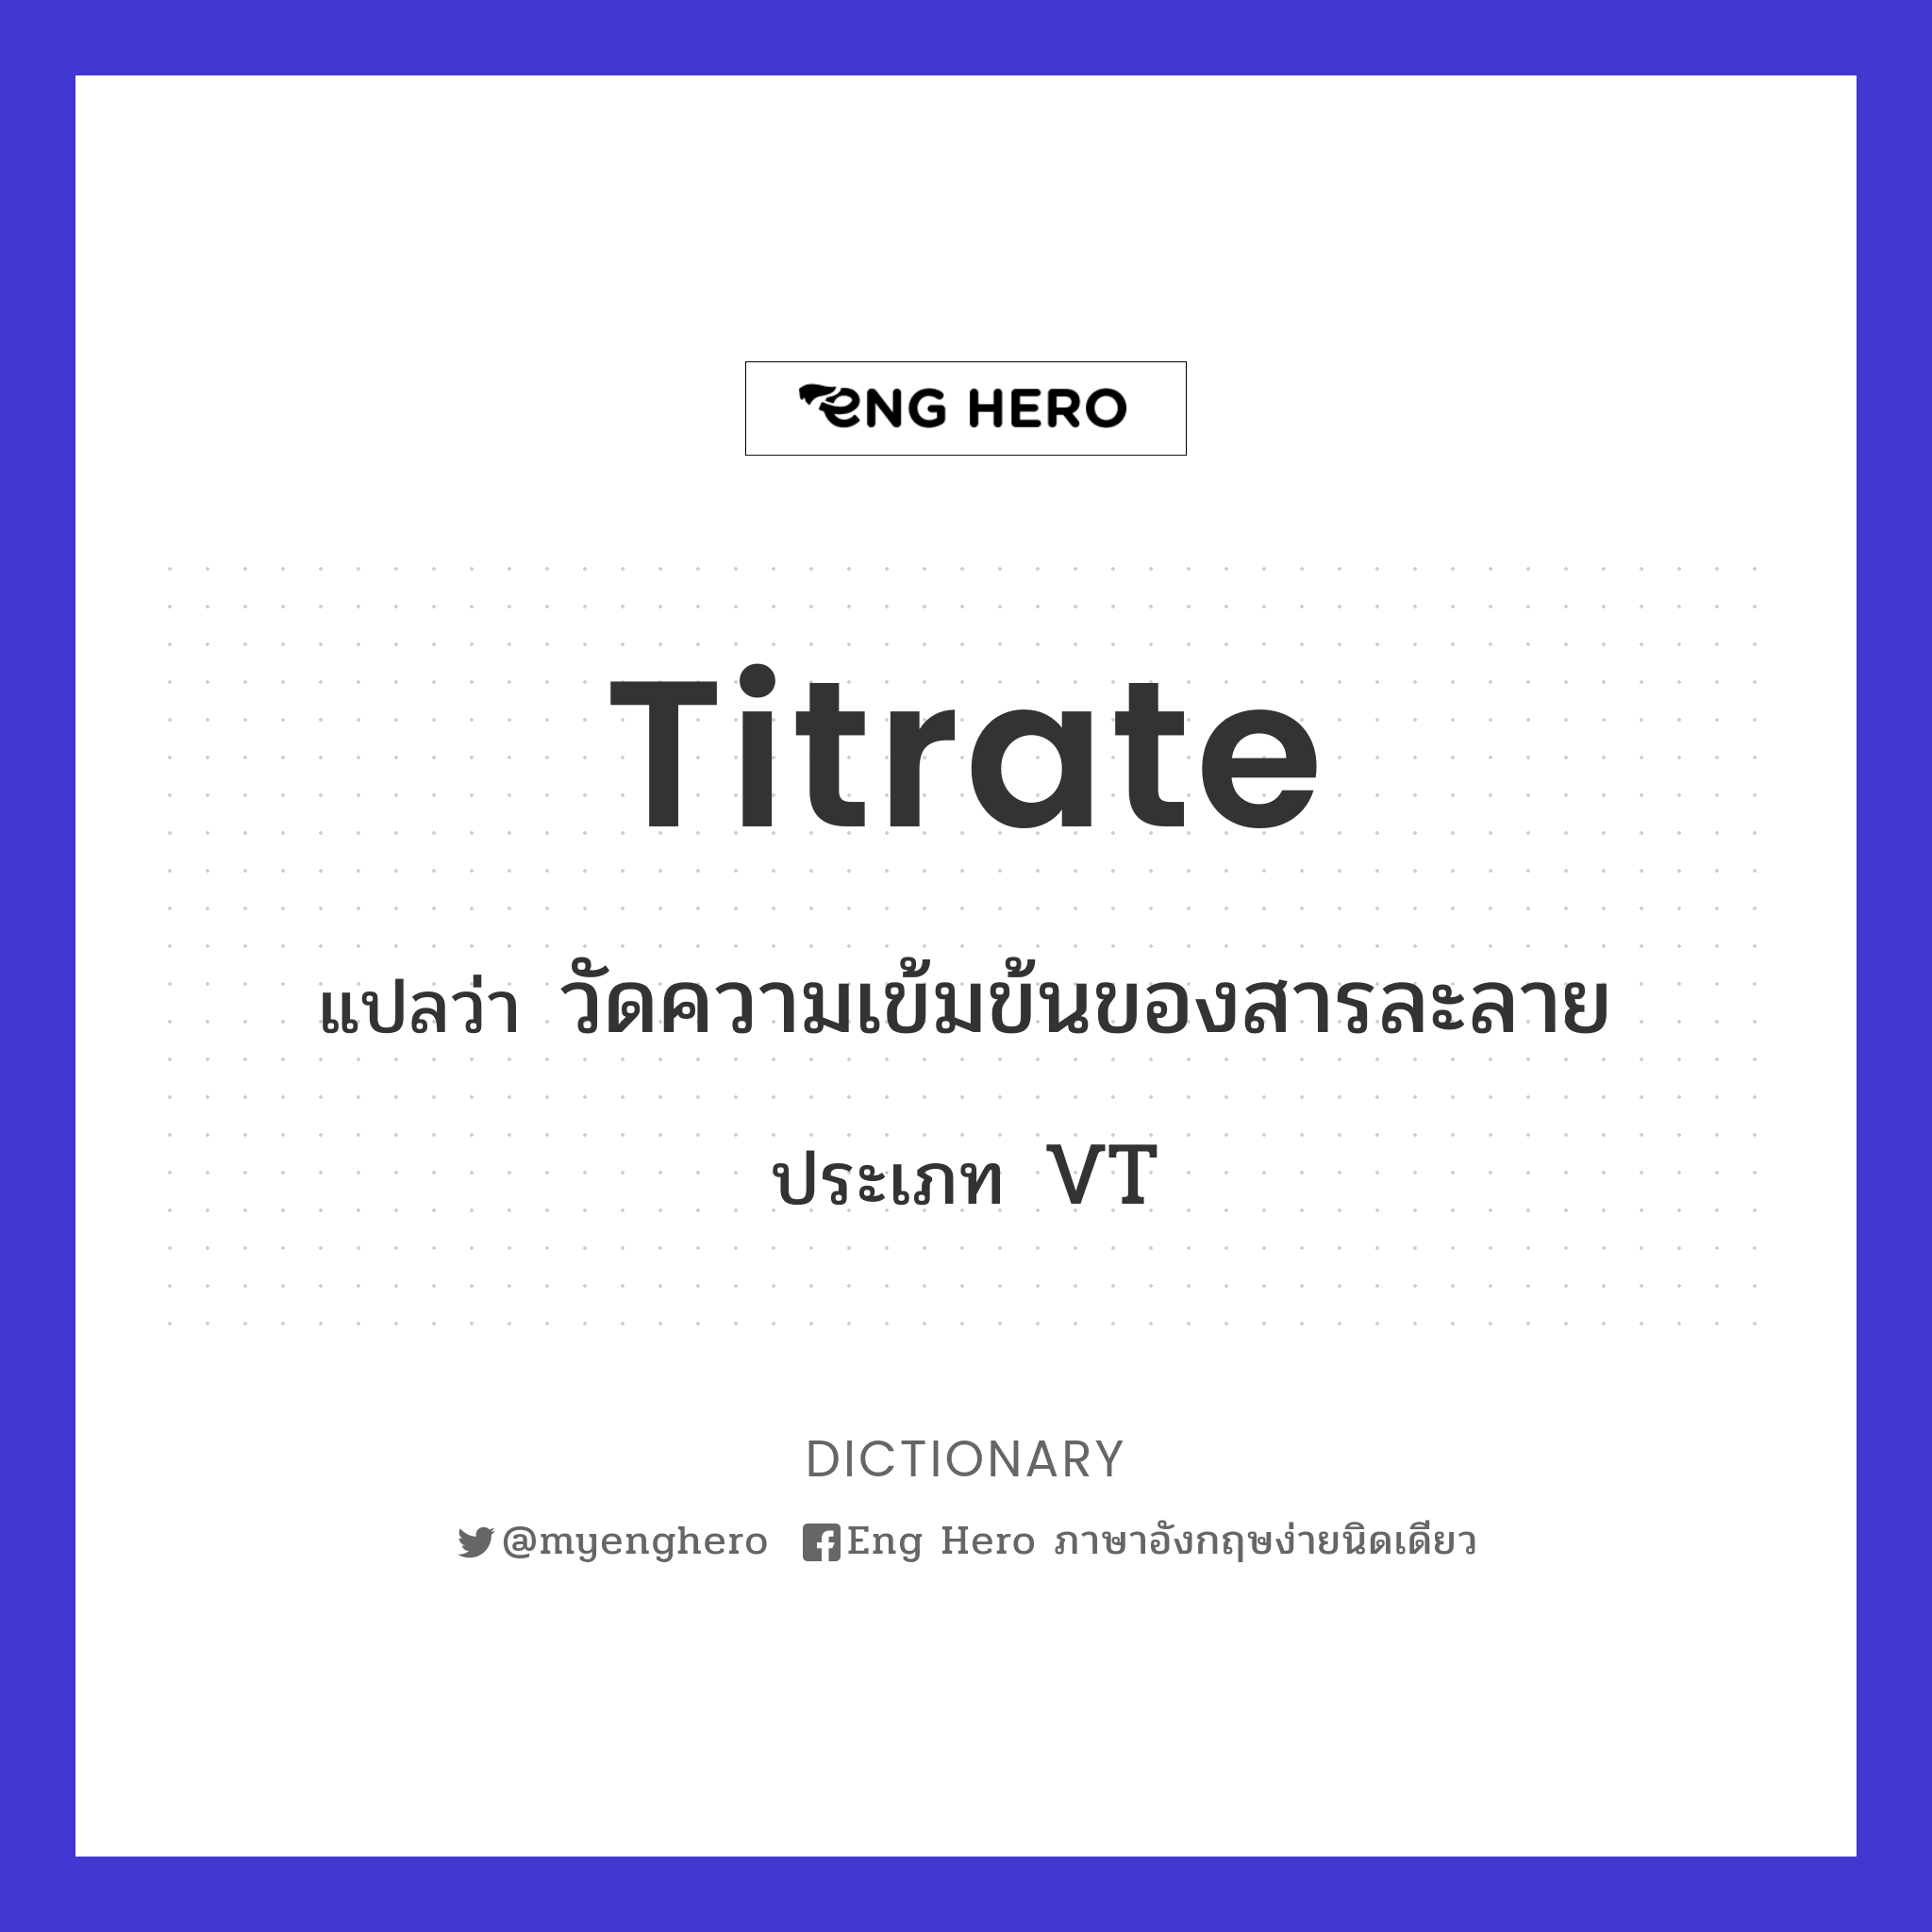 titrate